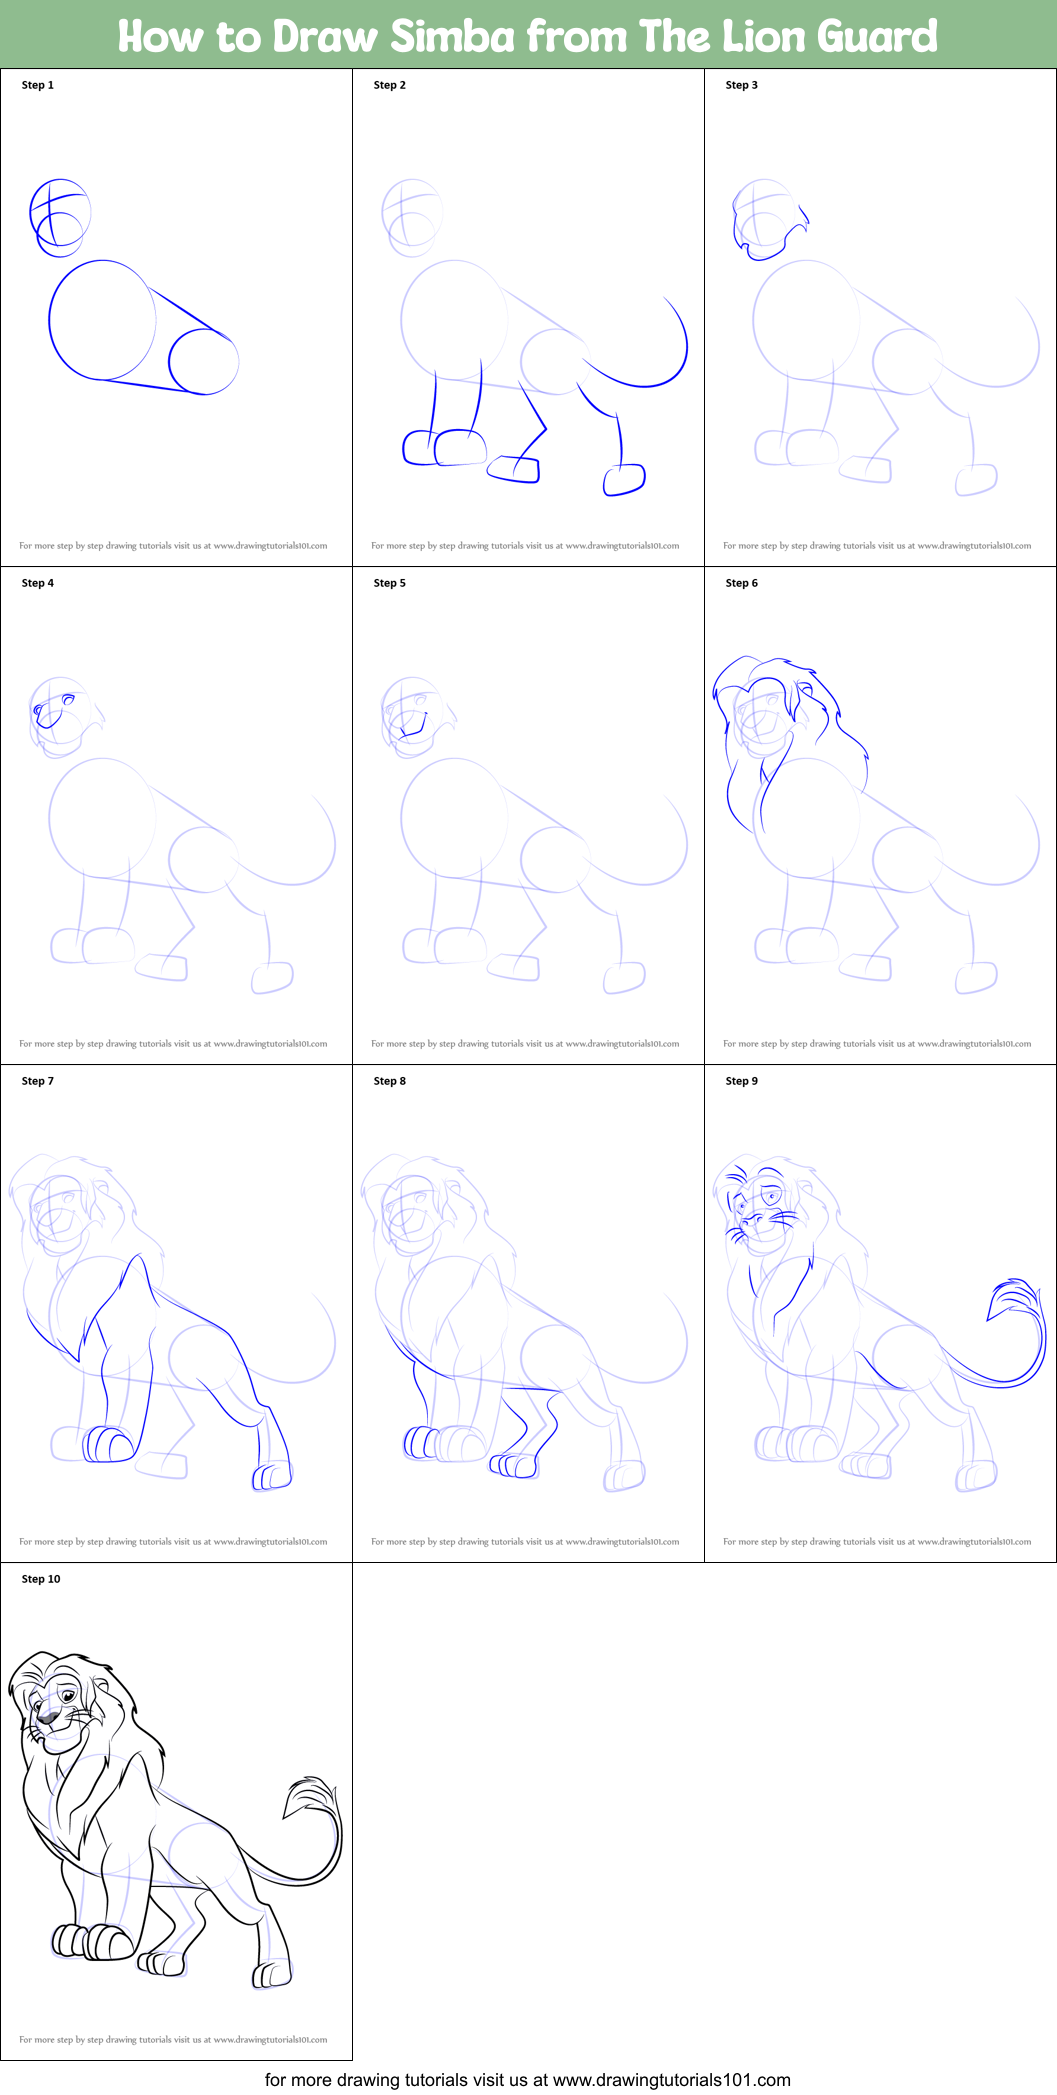 How to Draw Simba from The Lion Guard printable step by step drawing